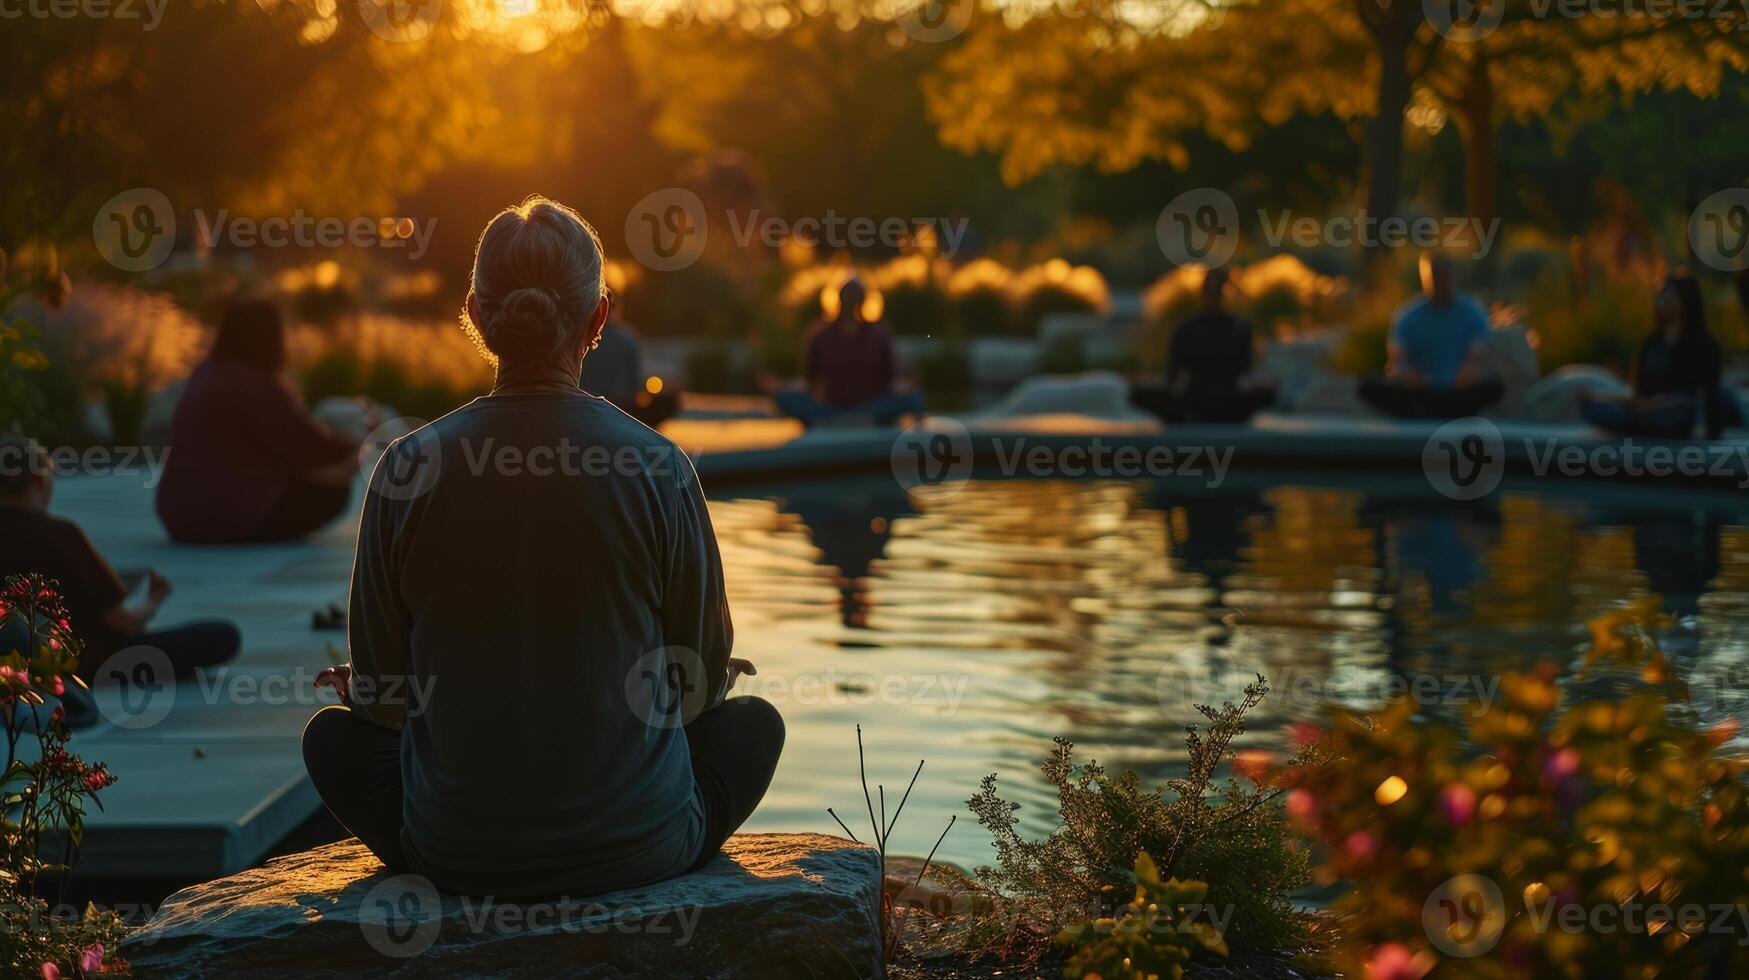 AI generated life long learning group of elderly meditation together near a pond at sunset, surrounded by nature photo